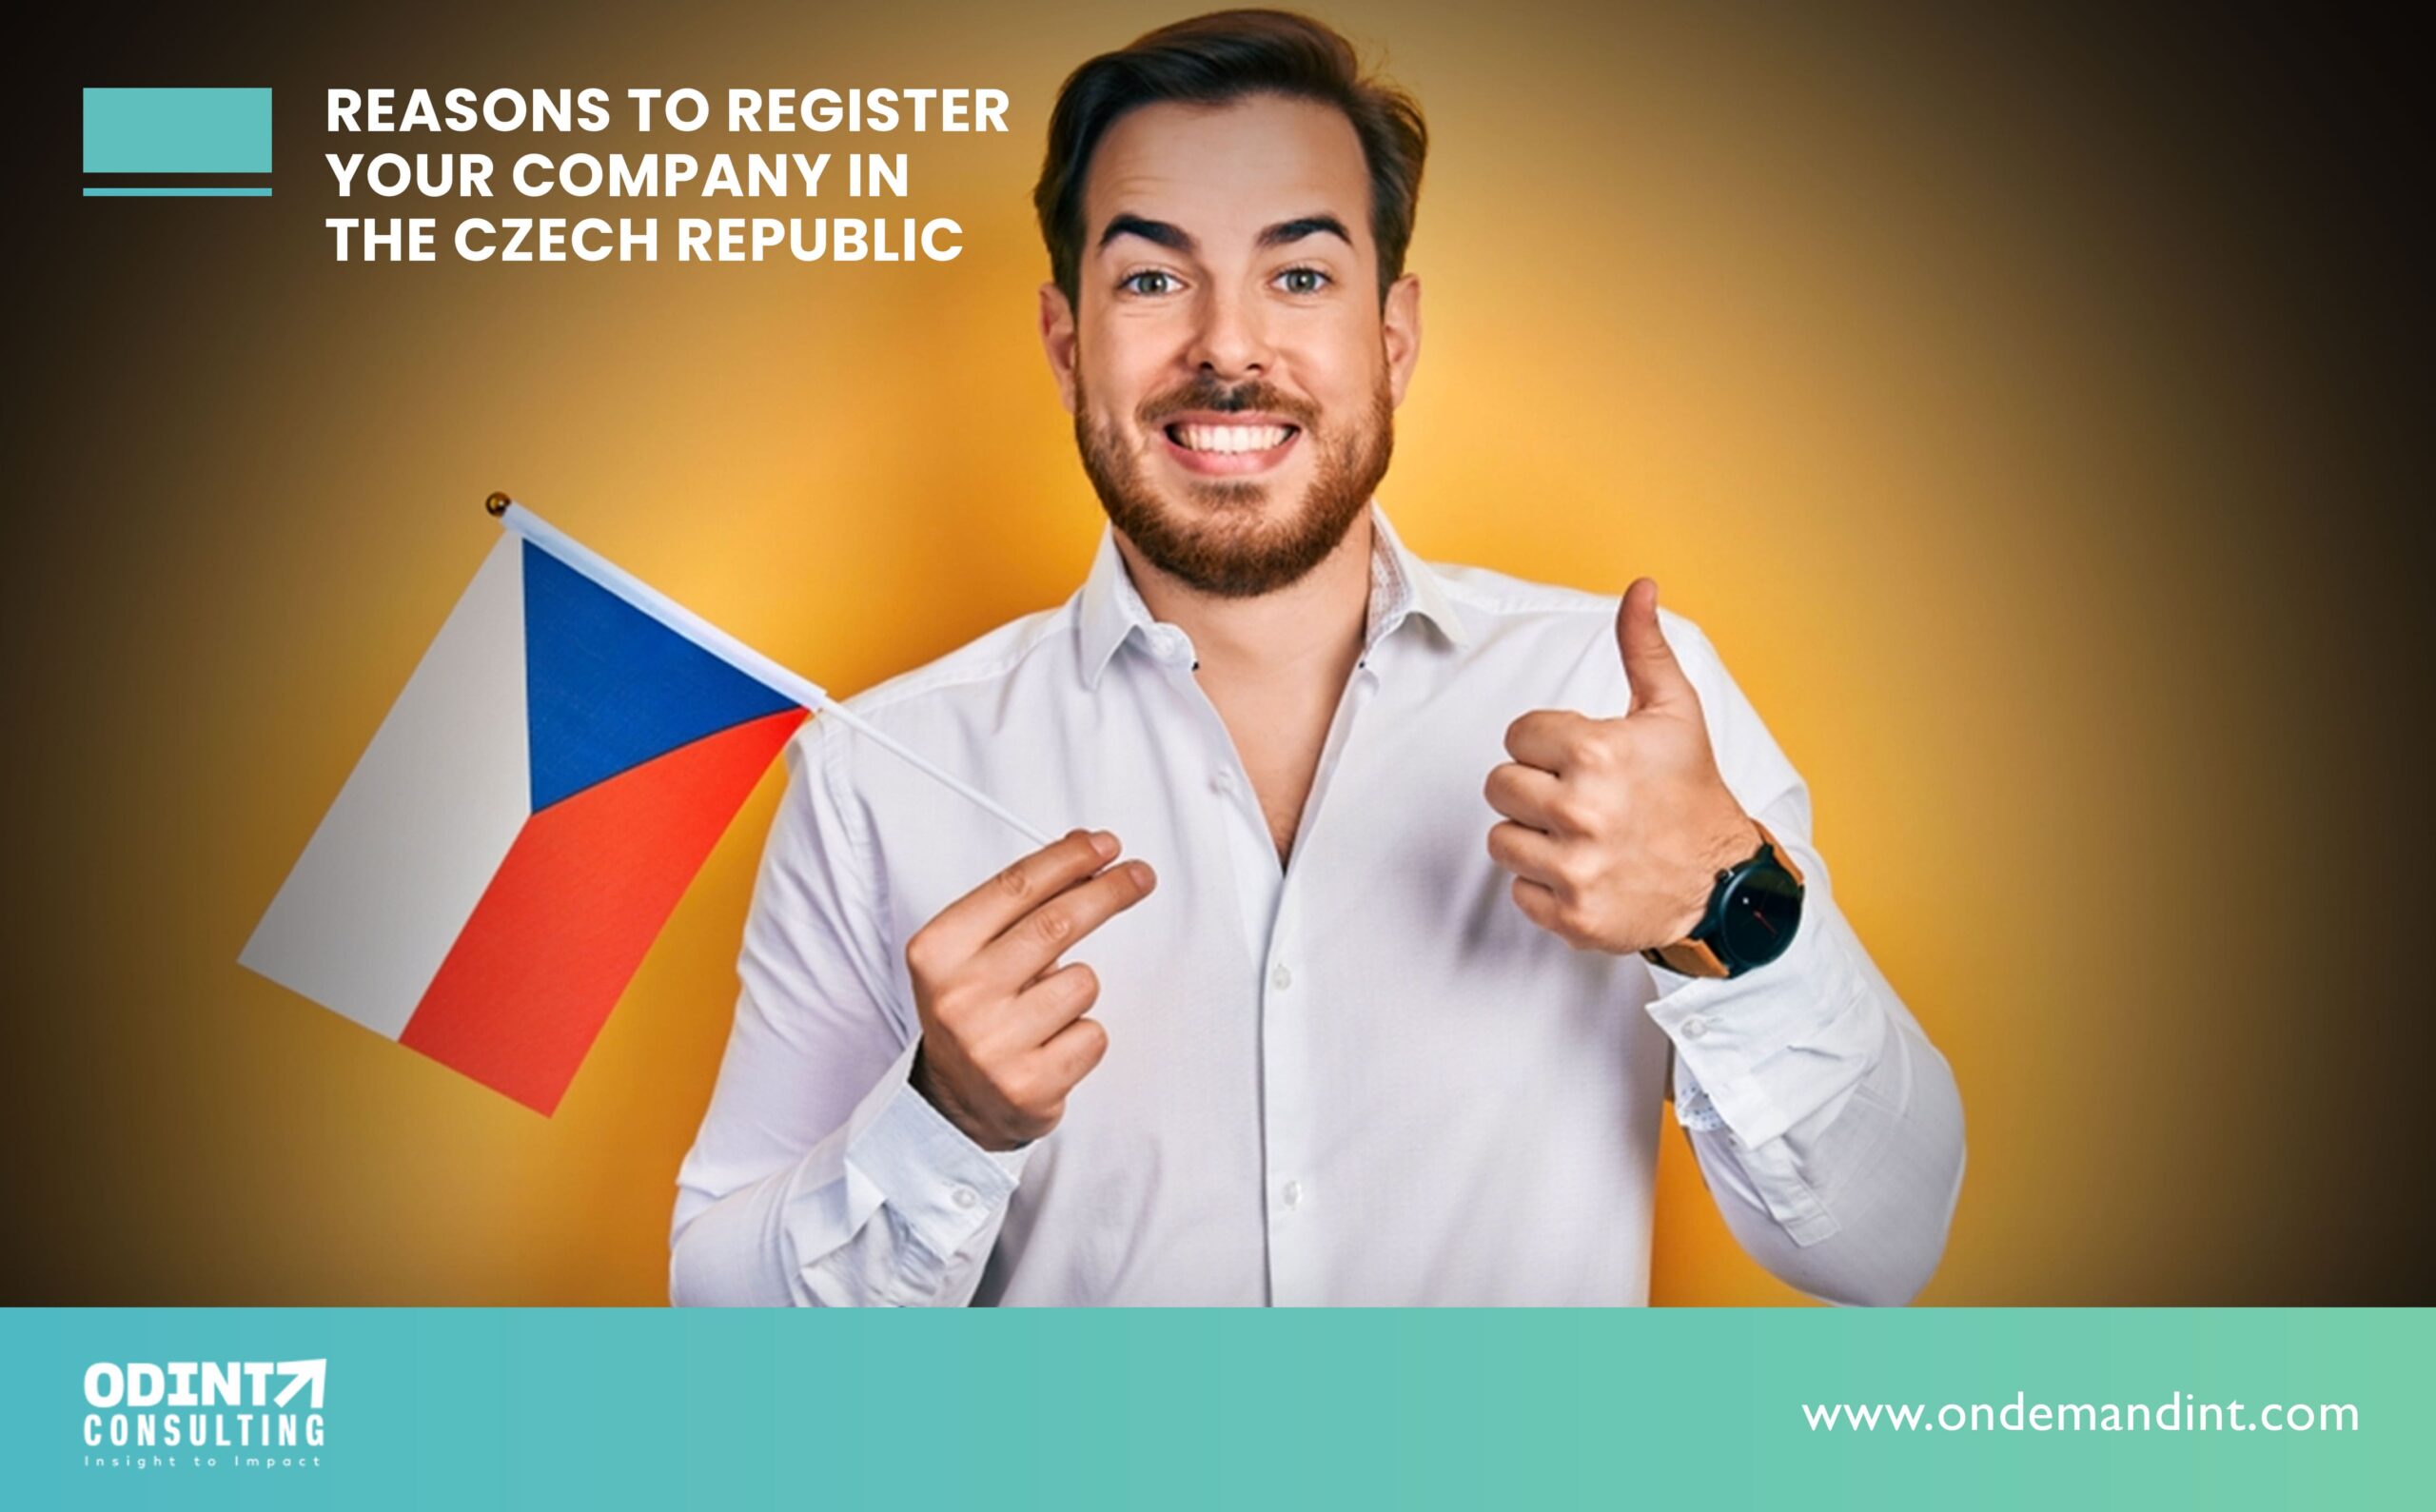 10 Reasons To Register Your Company In The Czech Republic